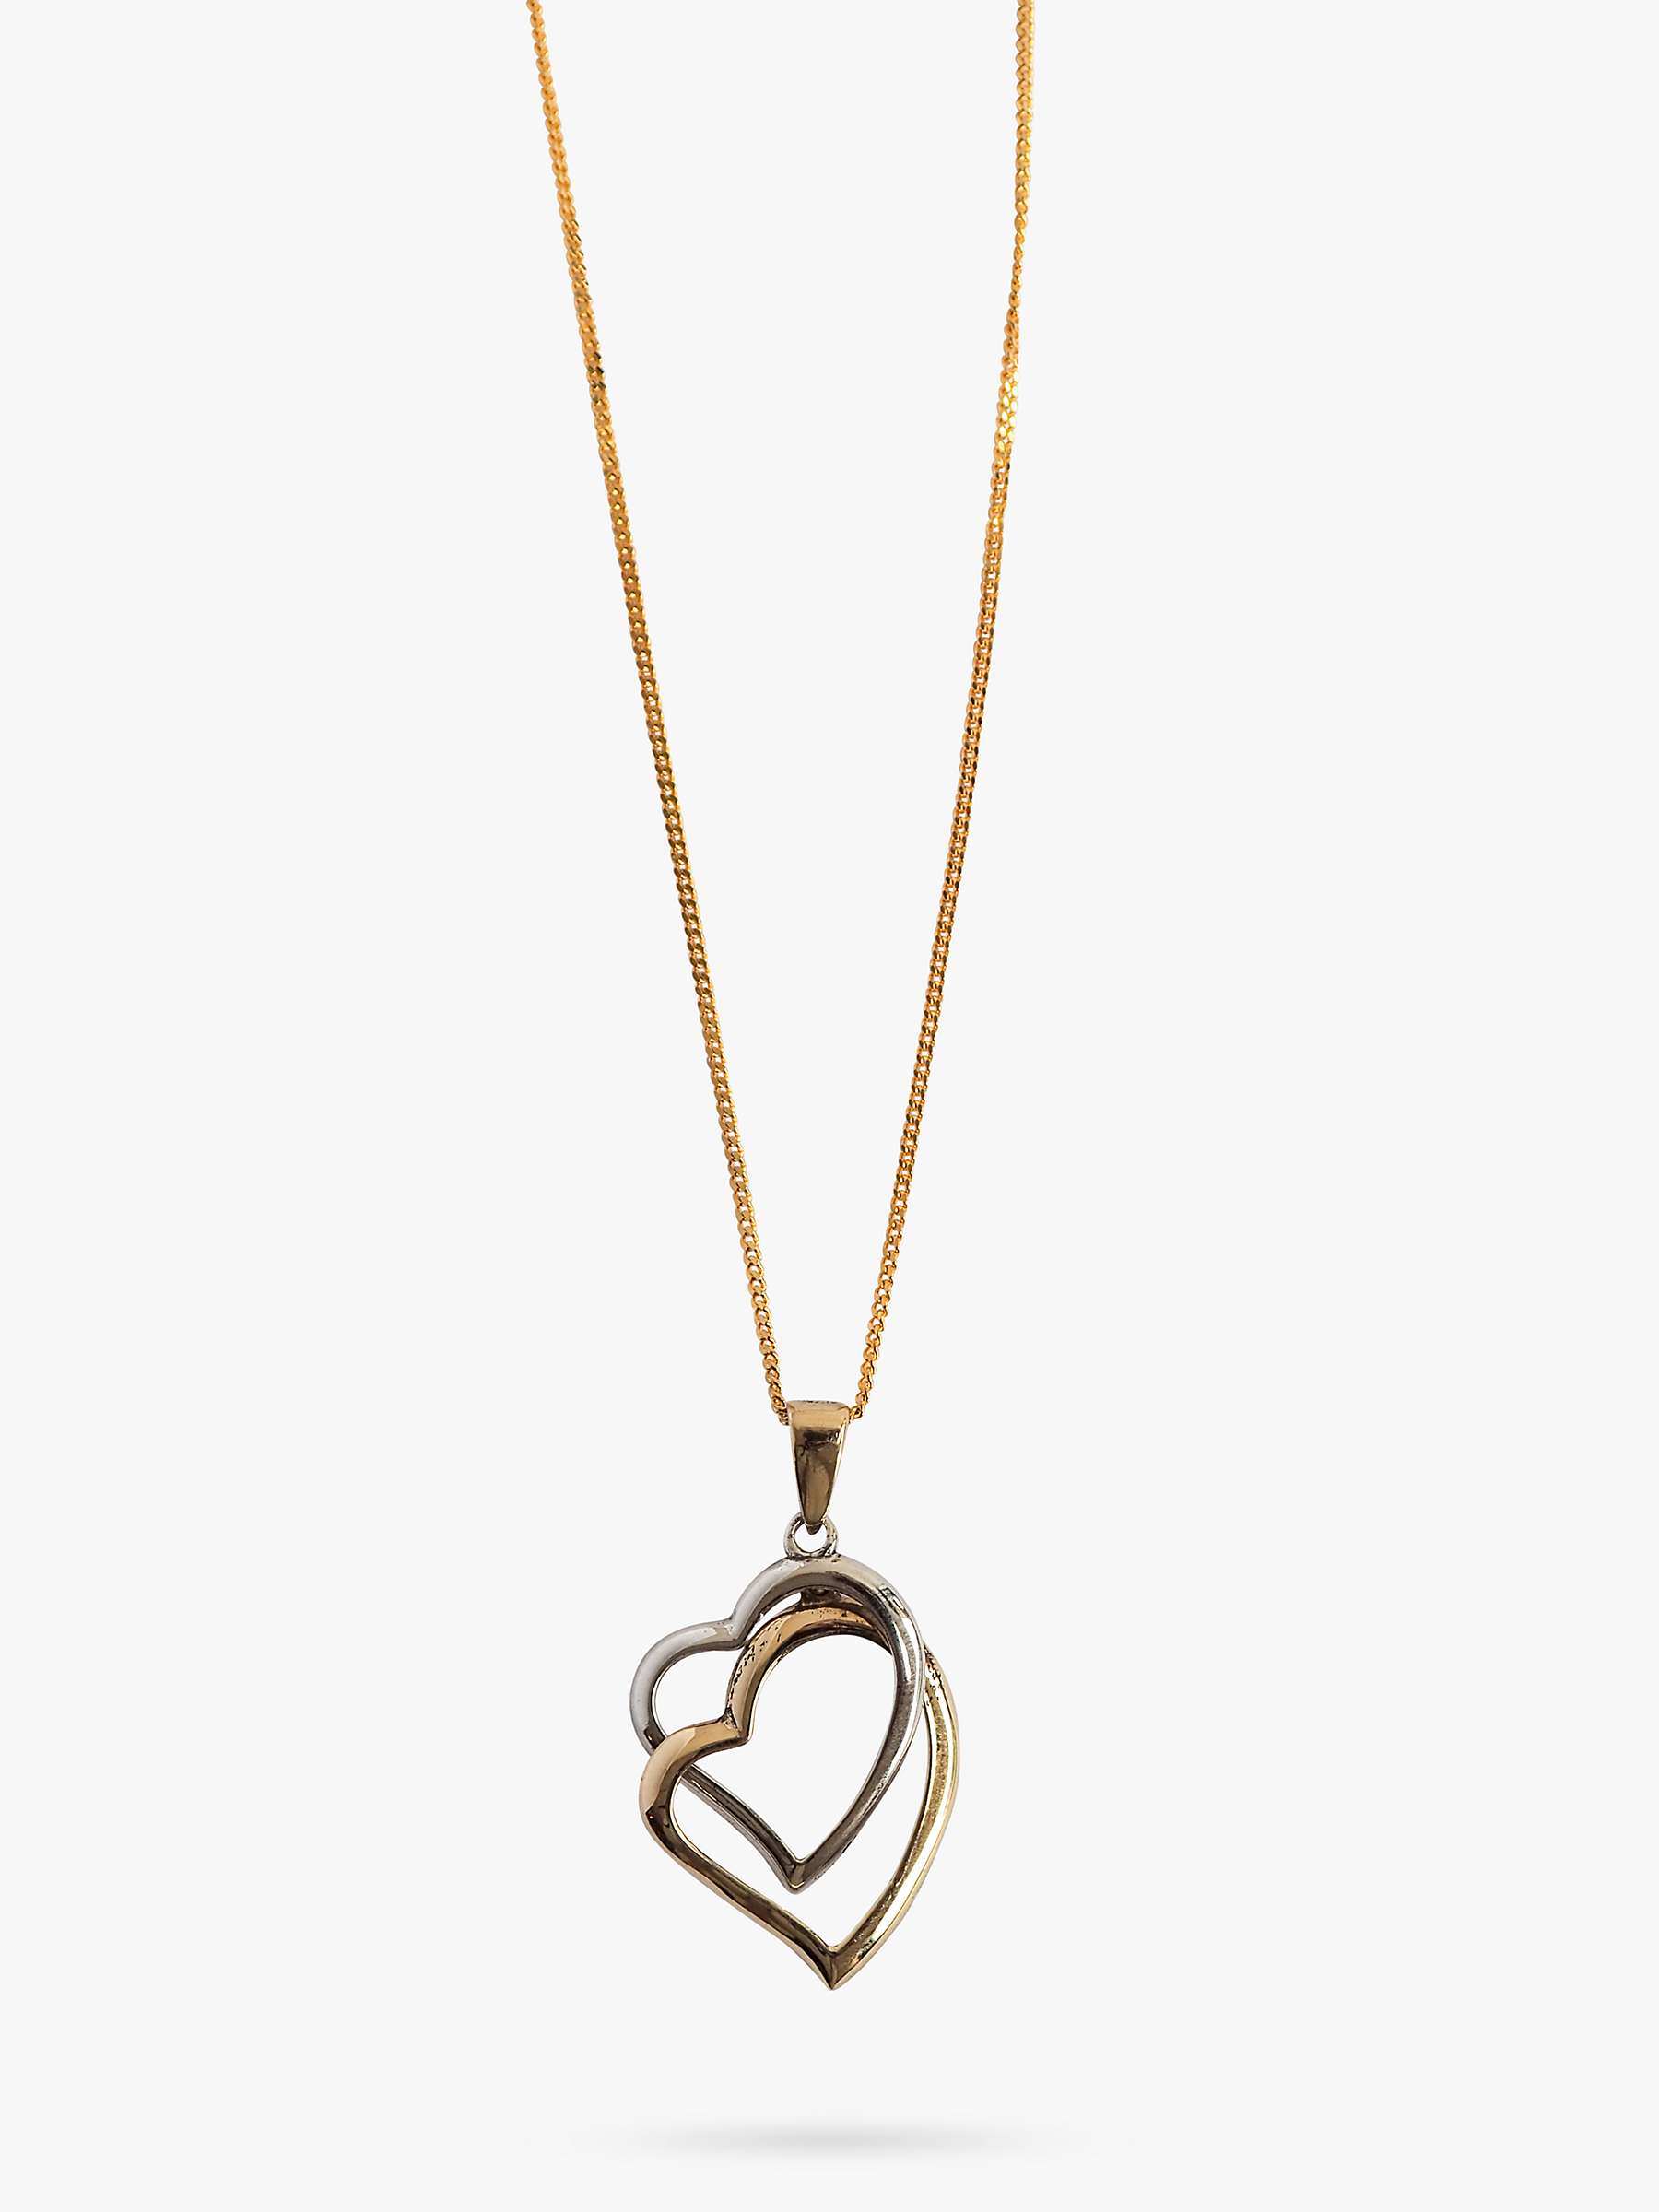 Buy L & T Heirlooms Second Hand 9ct Gold Double Heart Pendant Necklace Online at johnlewis.com